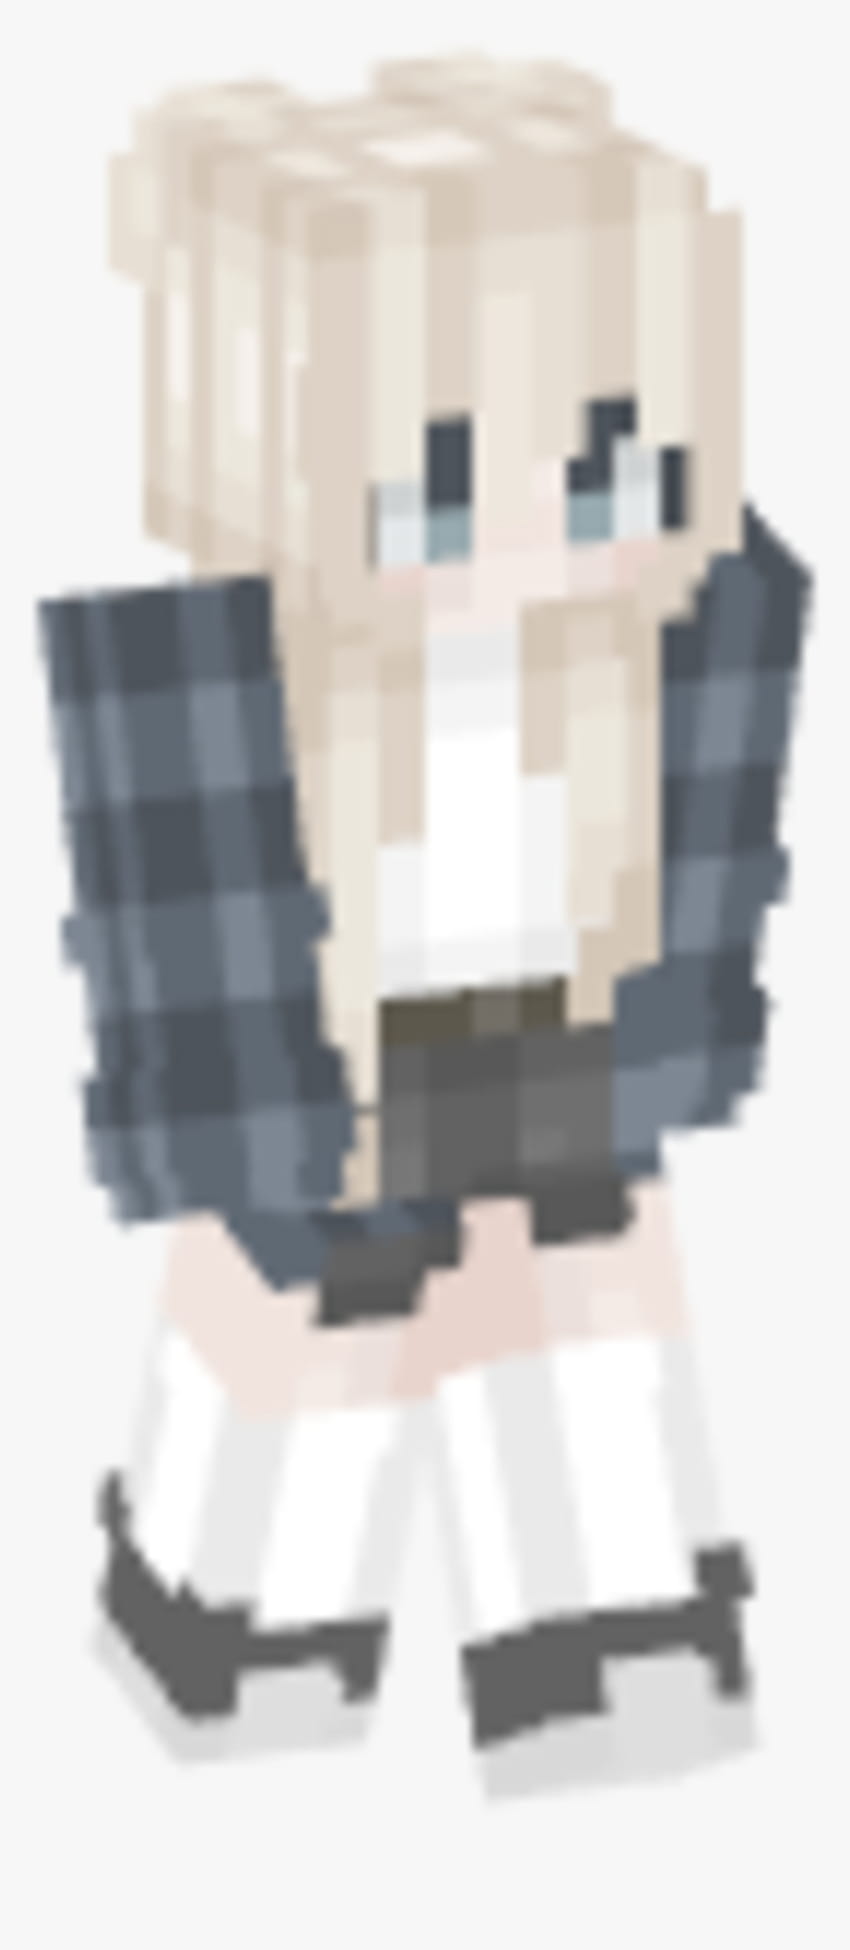 Anime Skins For Minecraft  New Skins ModsAmazoninAppstore for Android